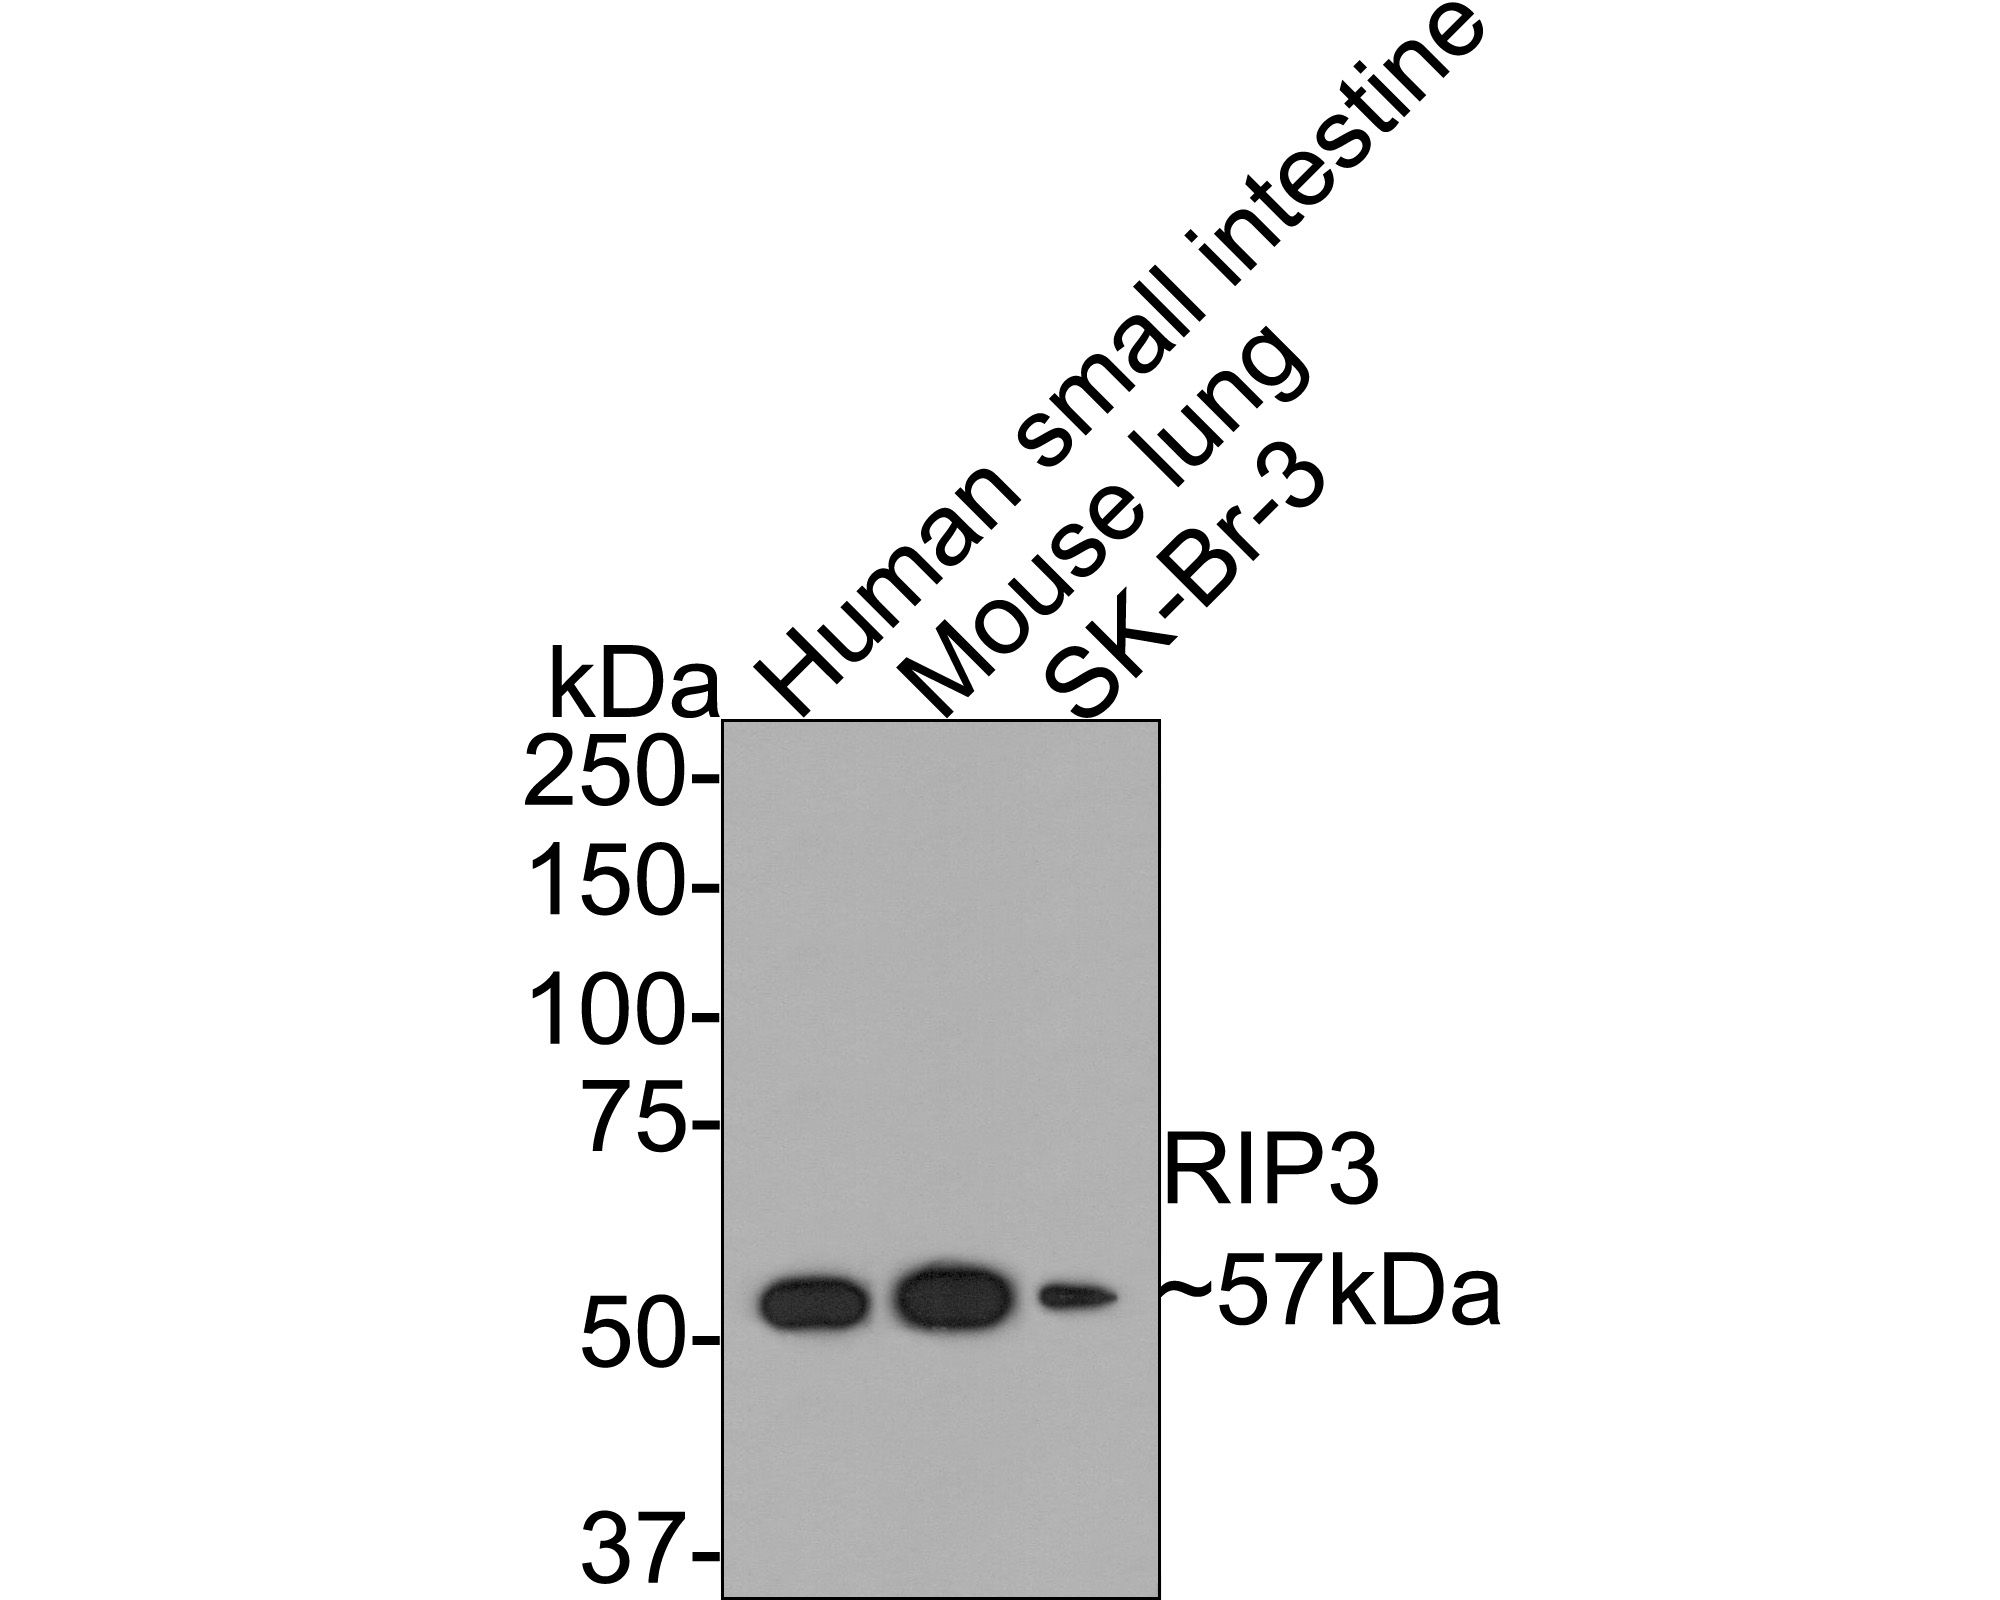 Western blot analysis of RIP3 on different lysates with Rabbit anti-RIP3 antibody (ER1901-27) at 1/1,000 dilution.<br />
<br />
Lane 1: Human small intestine tissue lysate (20 µg/Lane)<br />
Lane 2: Mouse lung tissue lysate (20 µg/Lane)<br />
Lane 3: SK-Br-3 cell lysate (10 µg/Lane)<br />
<br />
Predicted band size: 57 kDa<br />
Observed band size: 57 kDa<br />
<br />
Exposure time: 2 minutes;<br />
<br />
8% SDS-PAGE gel.<br />
<br />
Proteins were transferred to a PVDF membrane and blocked with 5% NFDM/TBST for 1 hour at room temperature. The primary antibody (ER1901-27) at 1/1,000 dilution was used in 5% NFDM/TBST at room temperature for 2 hours. Goat Anti-Rabbit IgG - HRP Secondary Antibody (HA1001) at 1:300,000 dilution was used for 1 hour at room temperature.